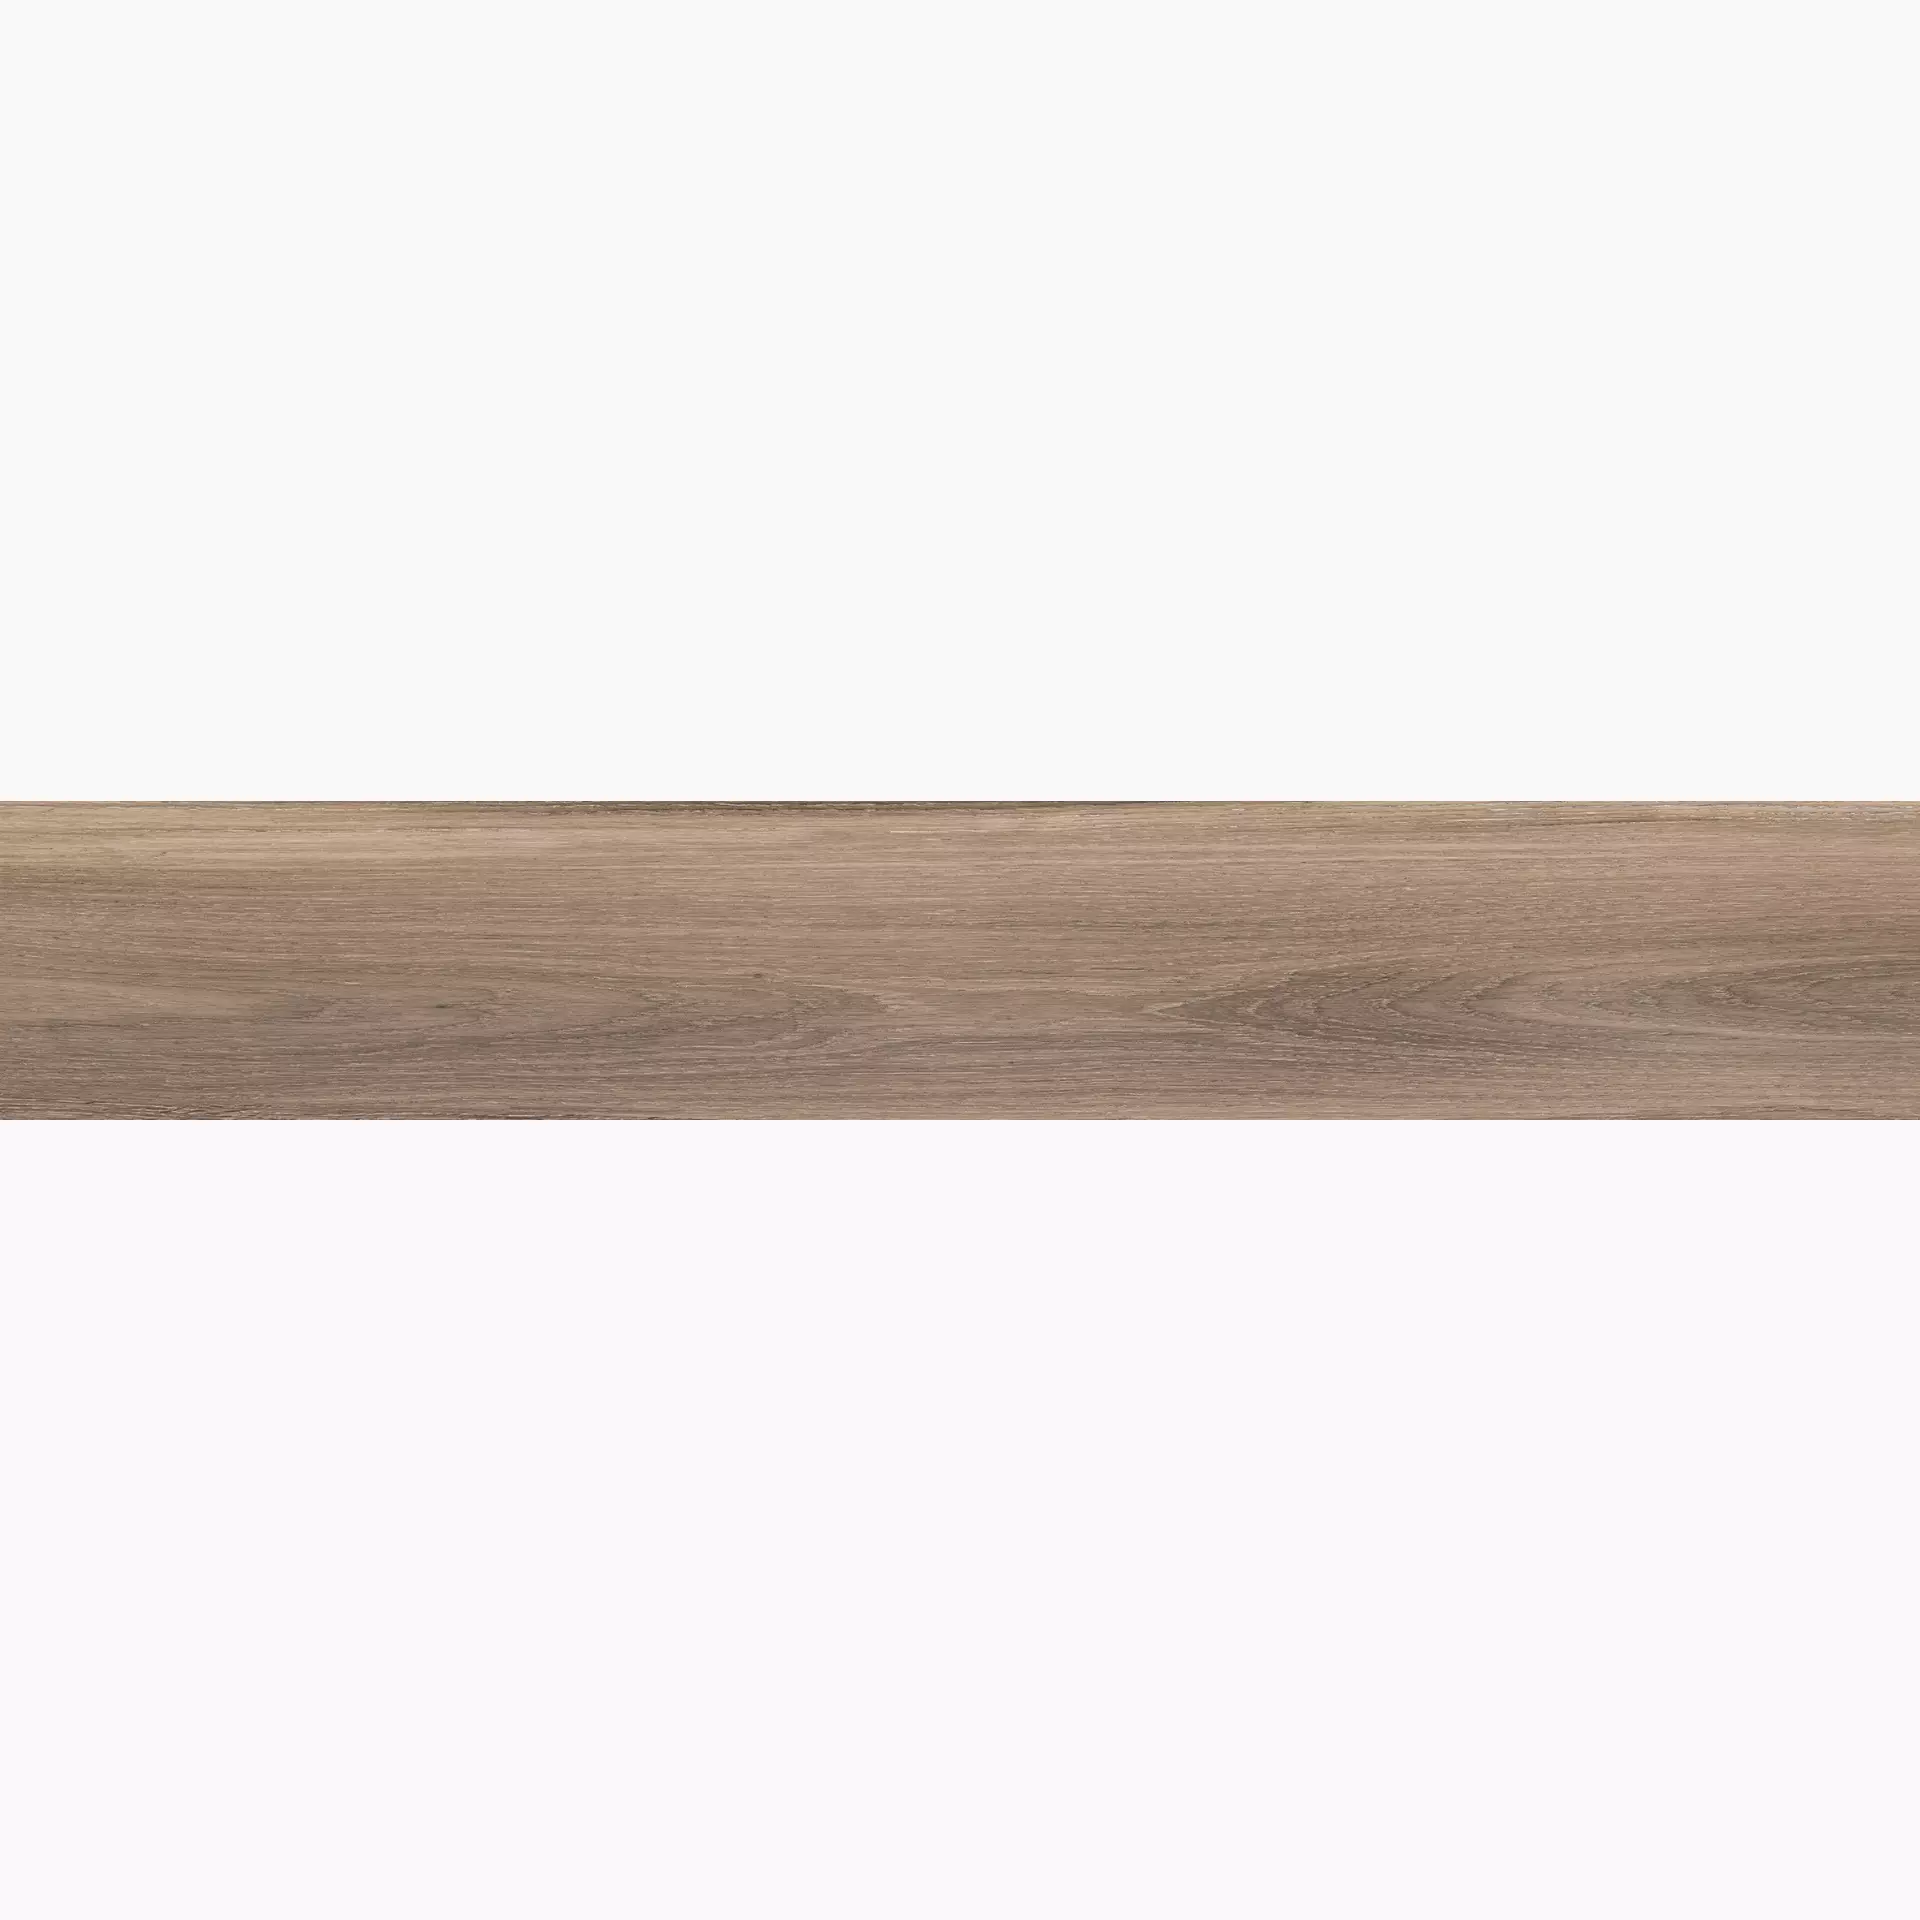 ABK Eco-Chic Avana Naturale PF60004940 20x120cm rectified 8,5mm